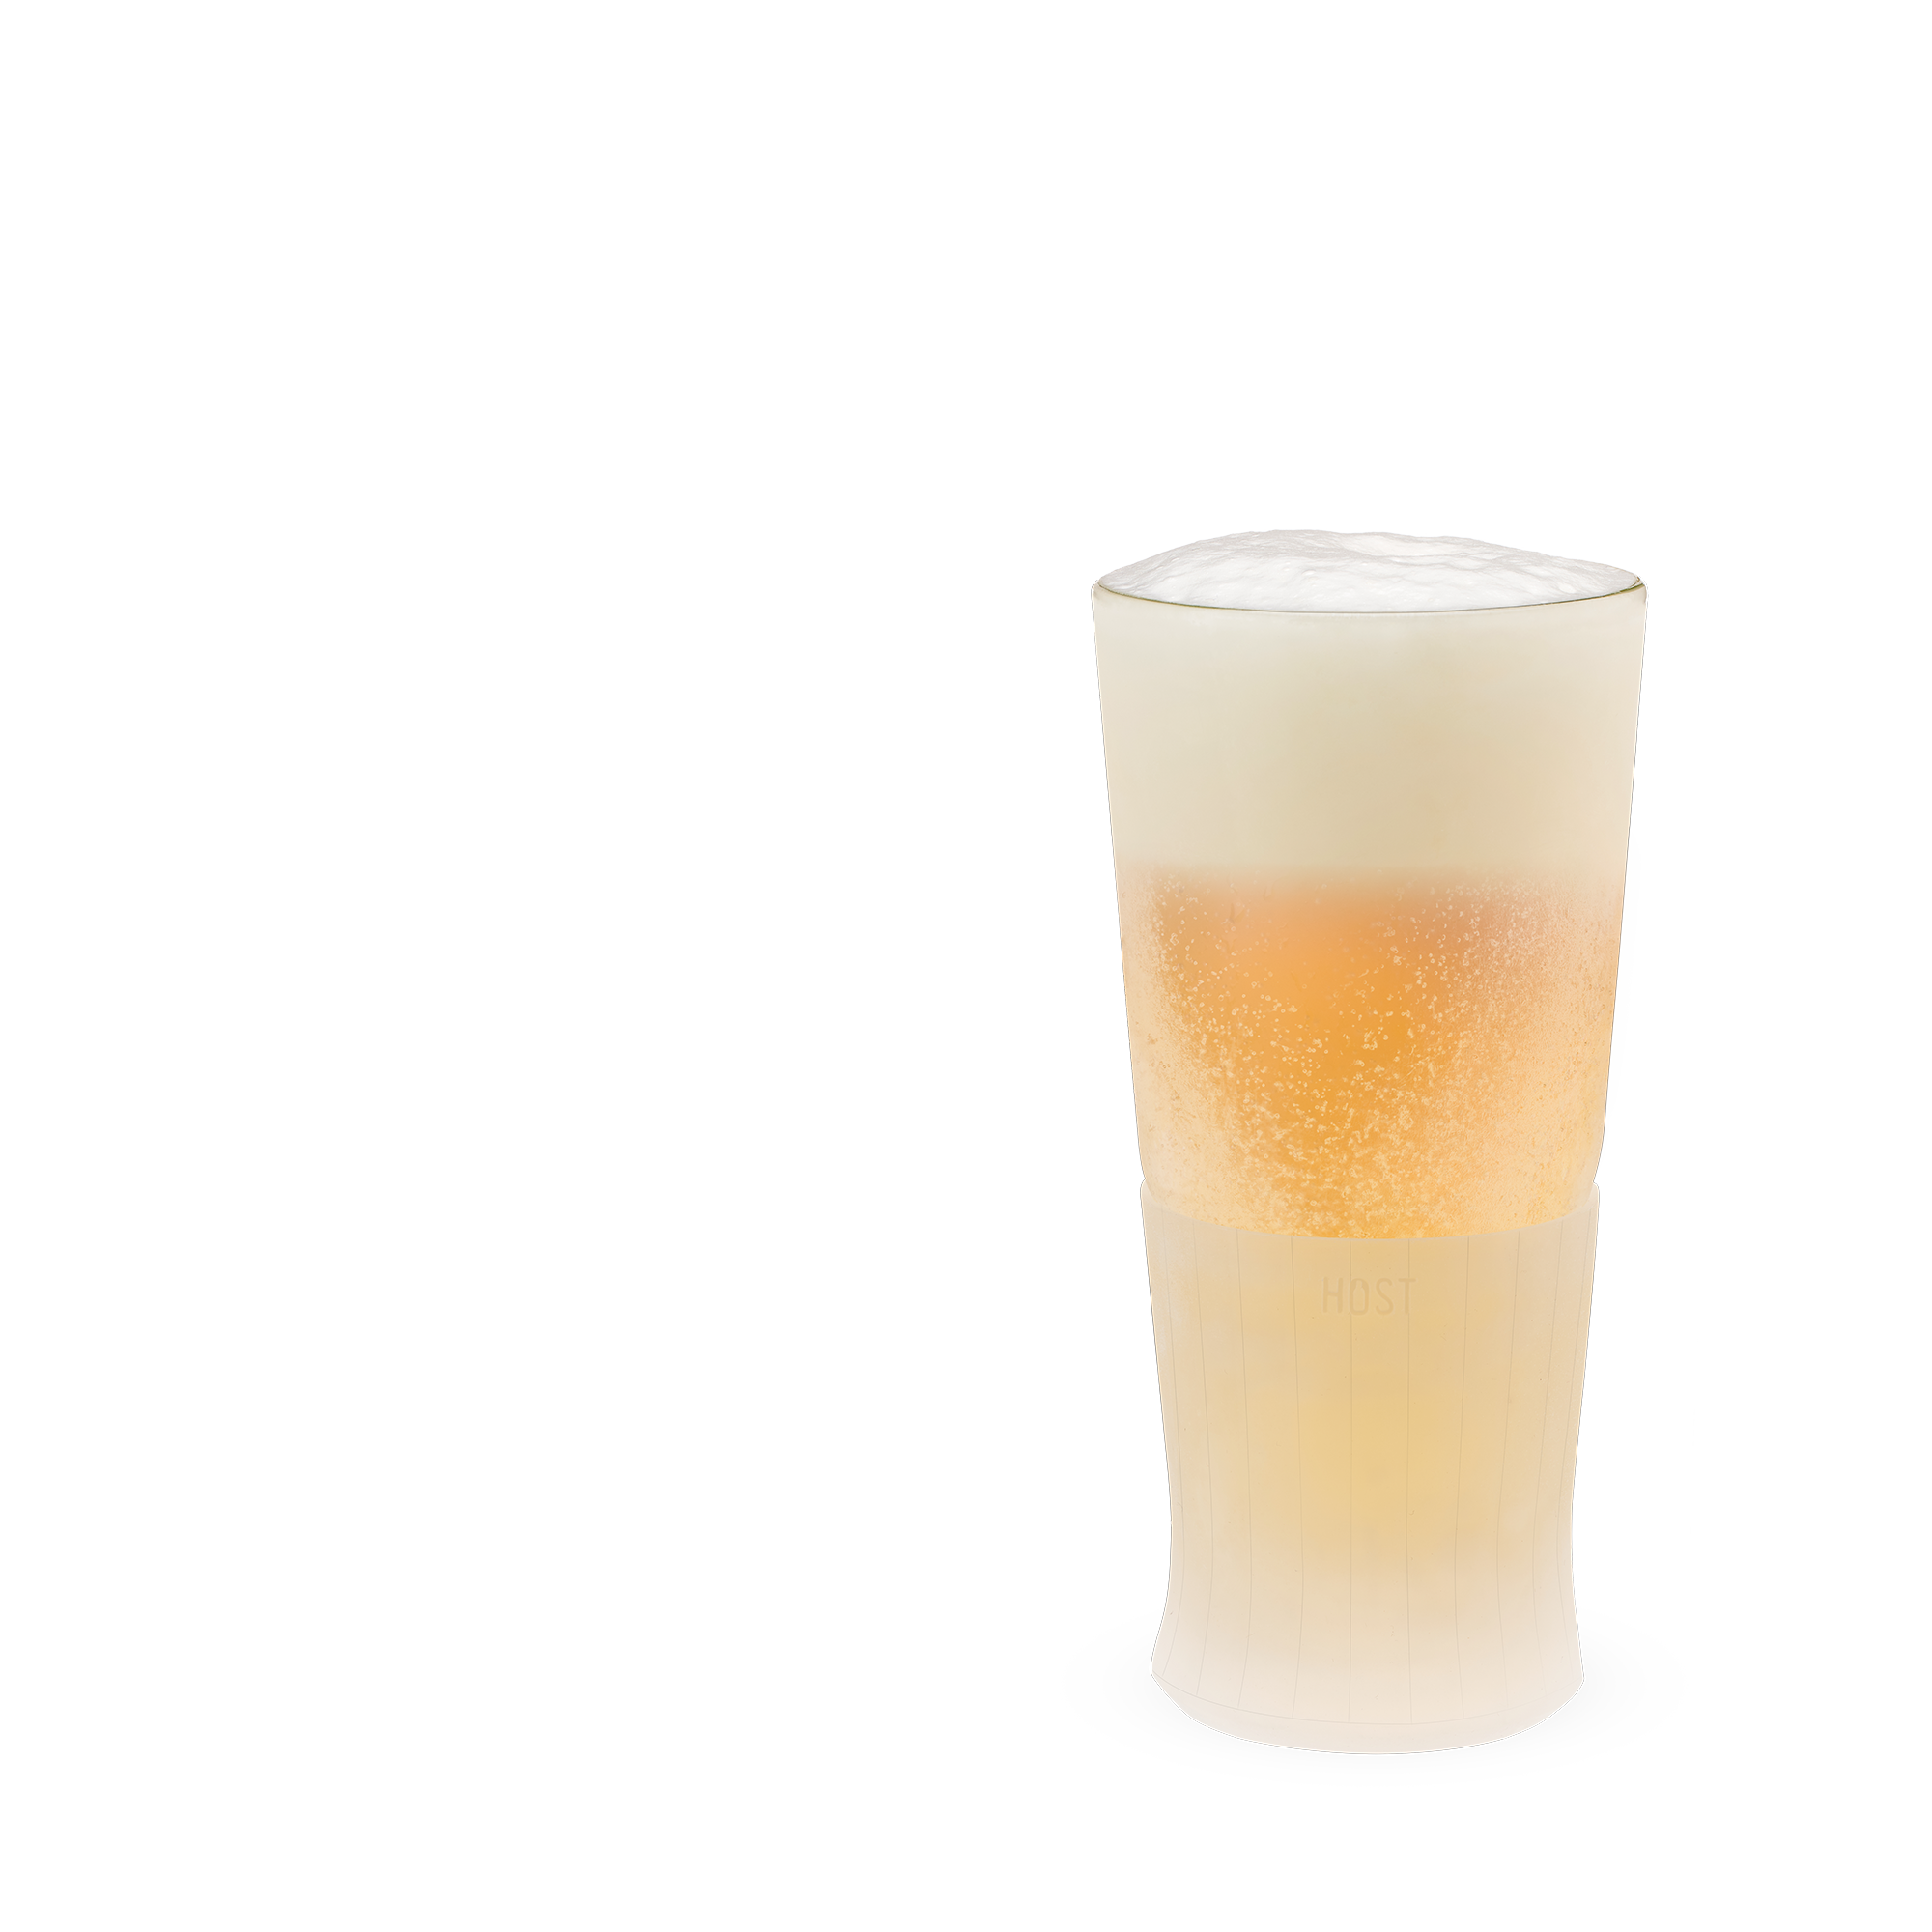 Glass Freeze Beer Glass (set of two) 